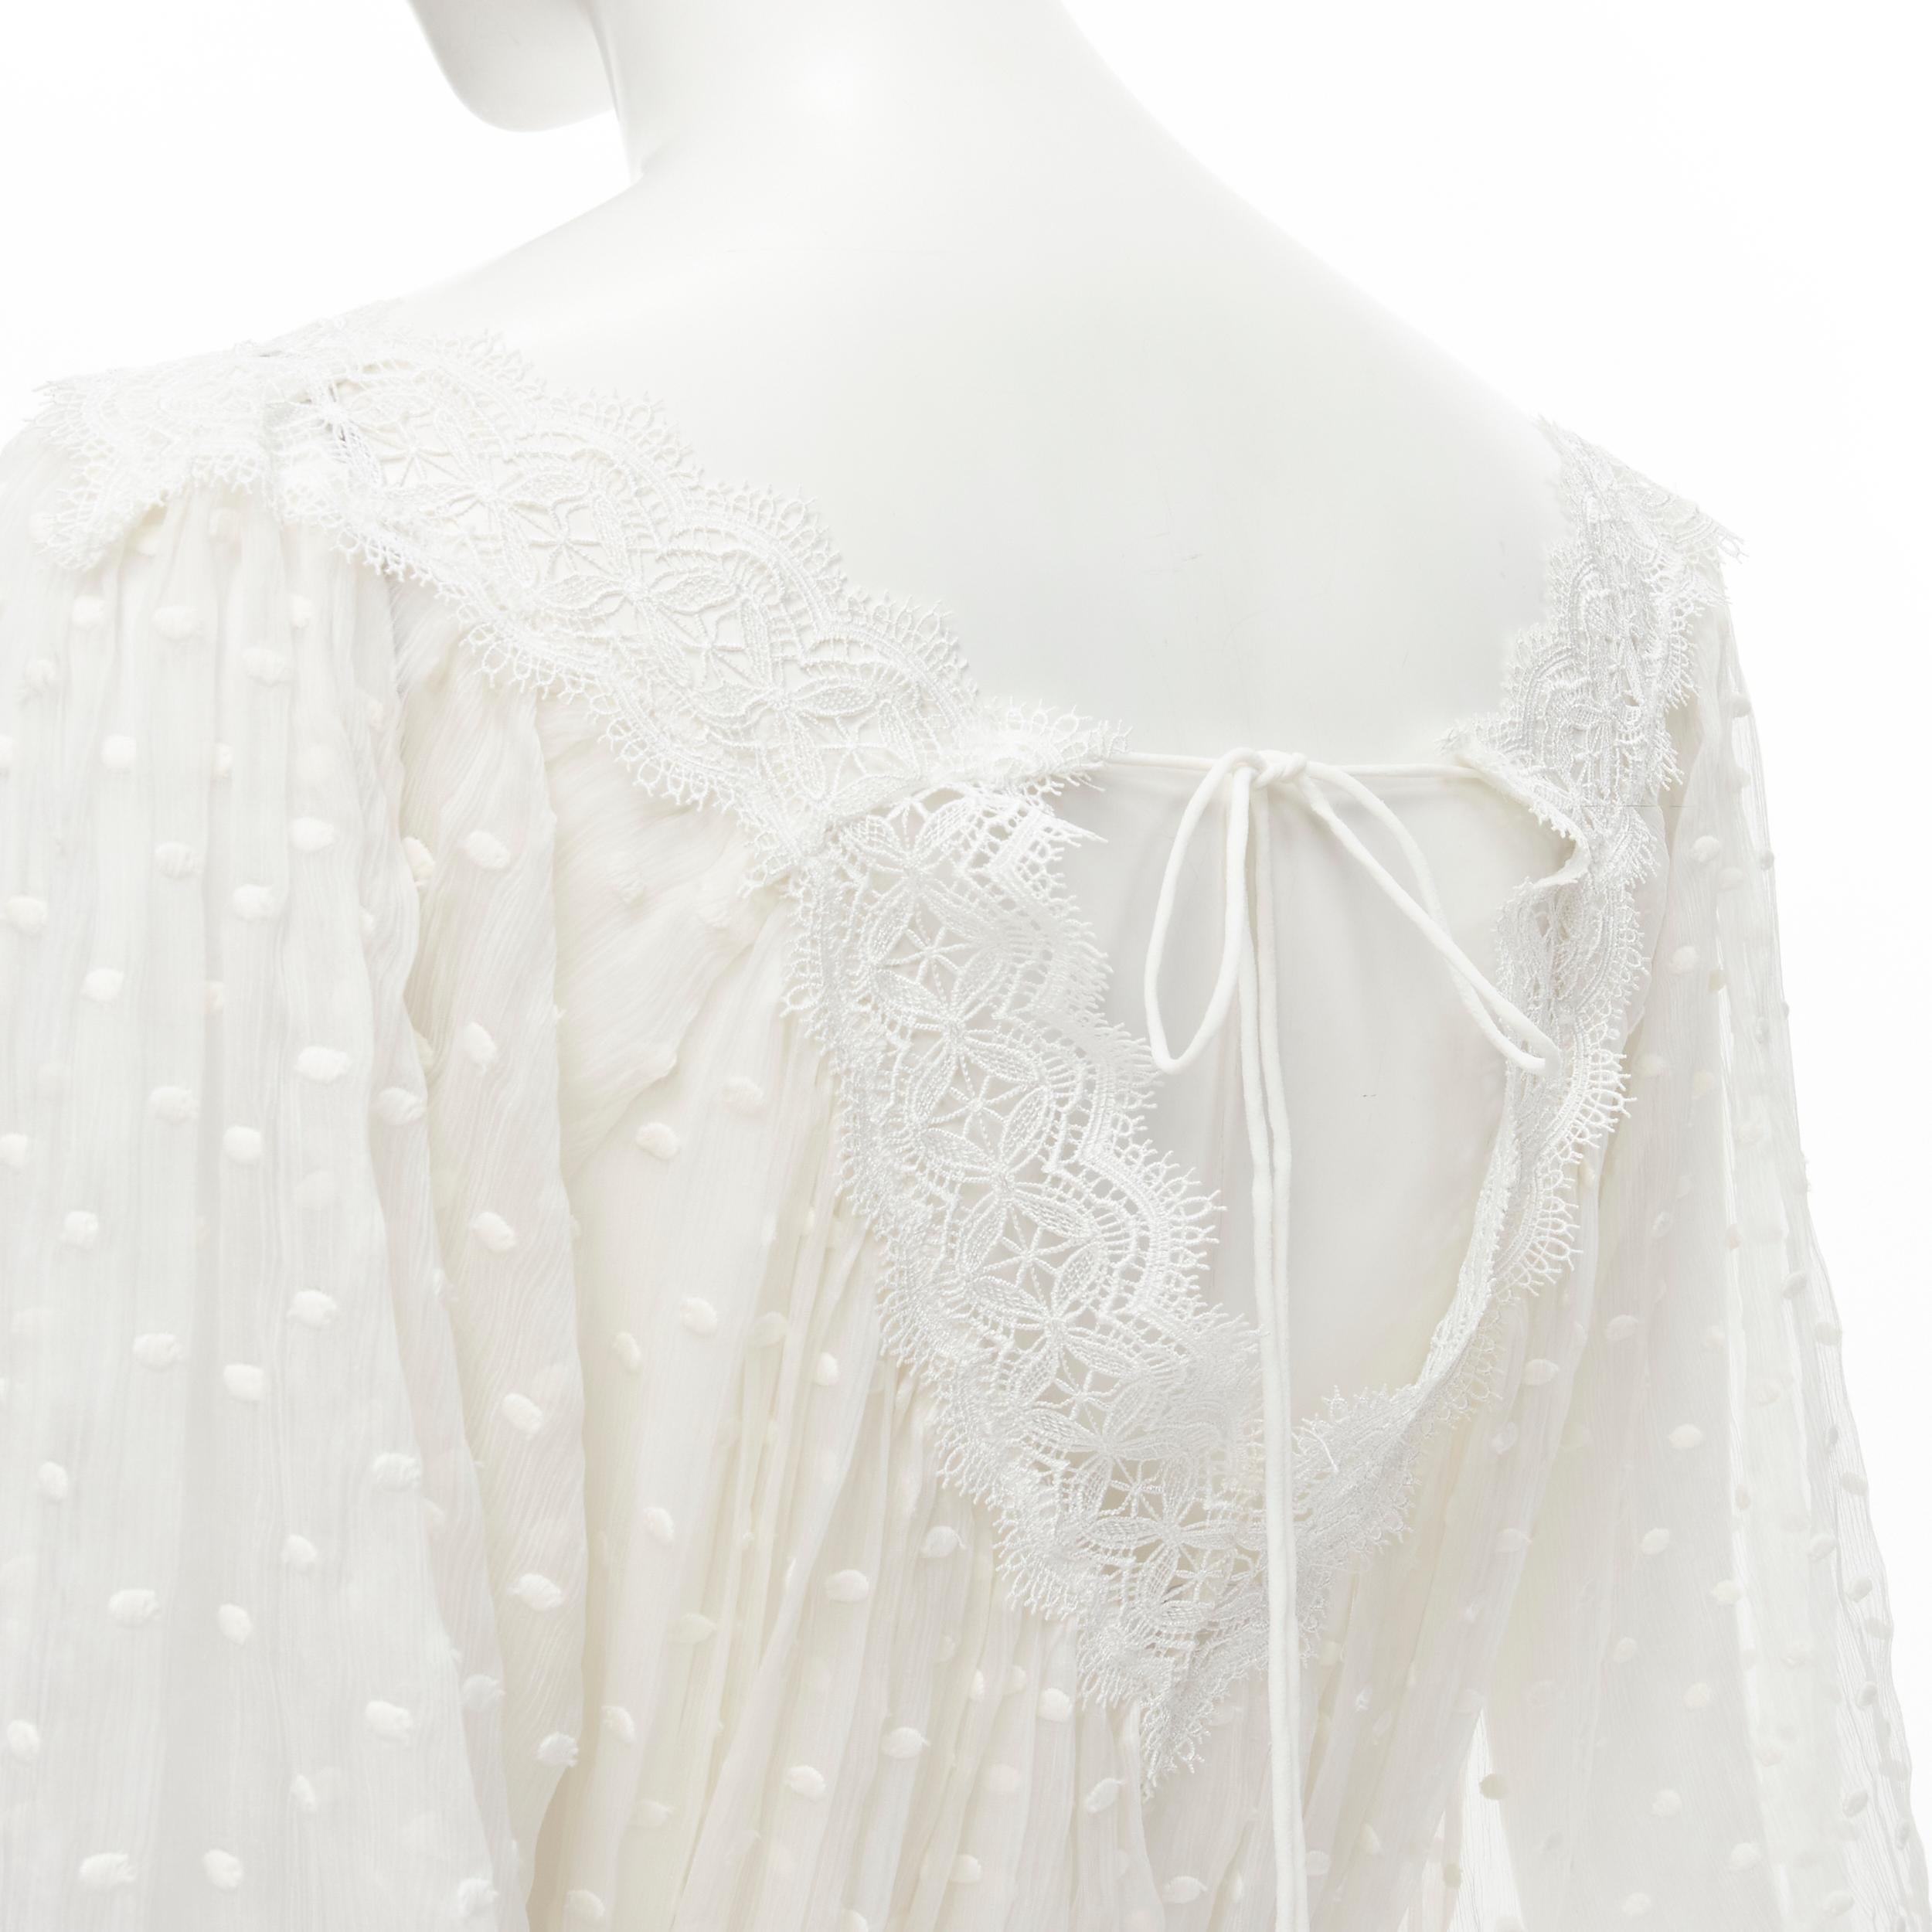 ZIMMERMAN white lace trim polka dot embroidery semi sheer boho dress US0 XS 
Reference: LNKO/A01846 Brand: Zimmerman 
Material: Silk 
Color: White 
Pattern: Solid 
Extra Detail: Lace trim V-neckline. Tie straps. Rope tie belt. Bubble sleeve. 
Made